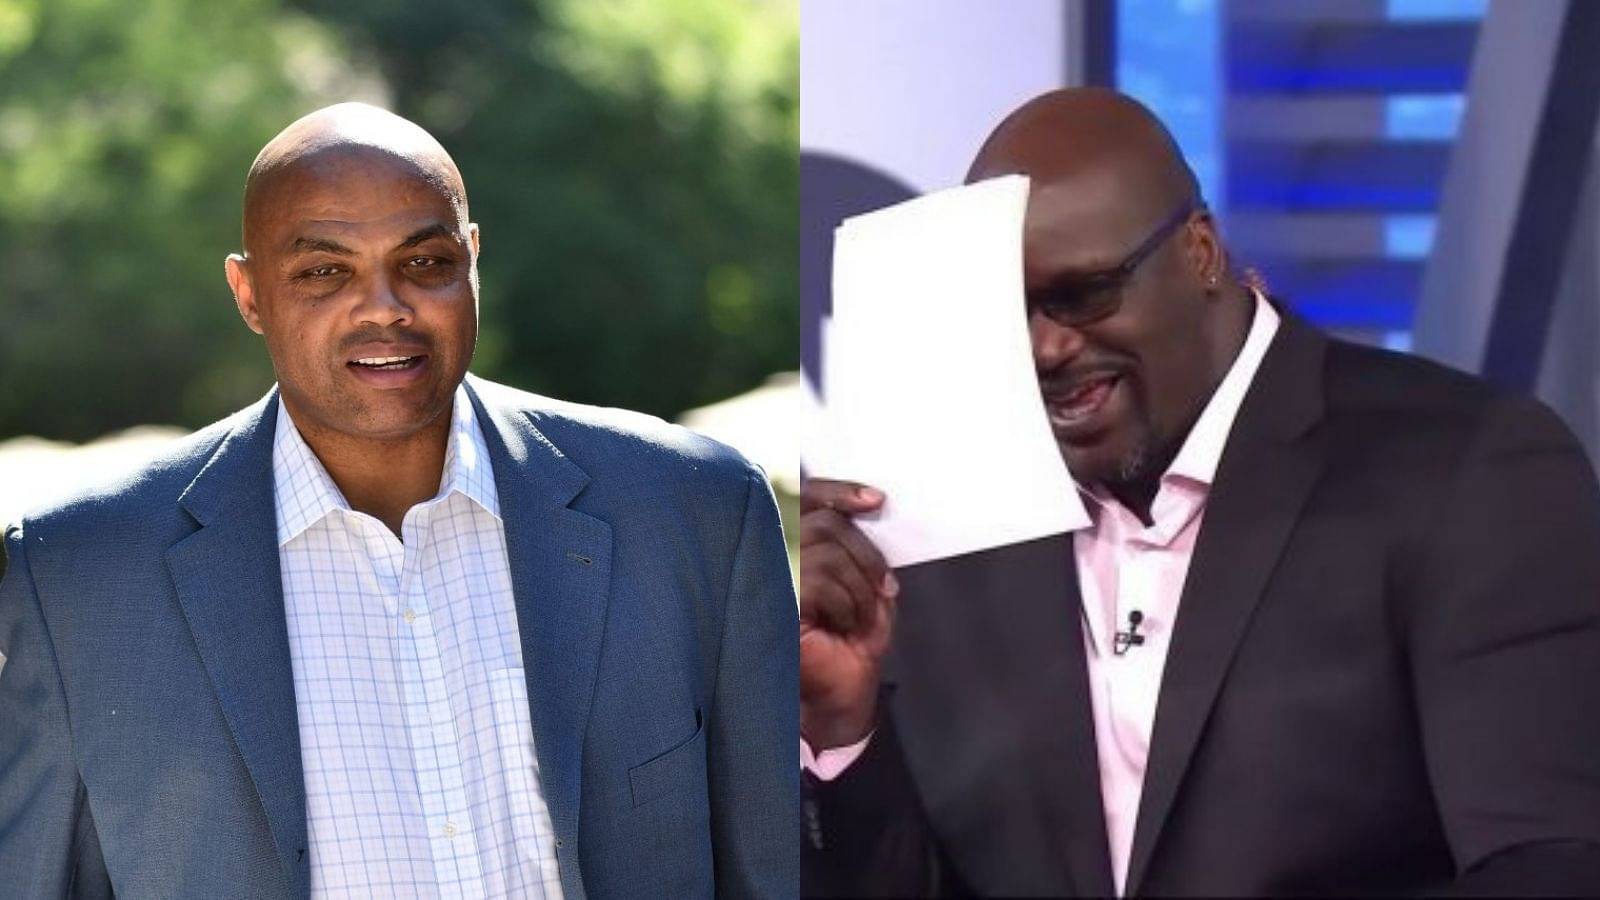 "I've been kissed harder than that!": Charles Barkley 's hilarious comparison of his s#x life with the 'hard fouls' in Warriors - Grizzlies series leaves Shaq and rest in splits